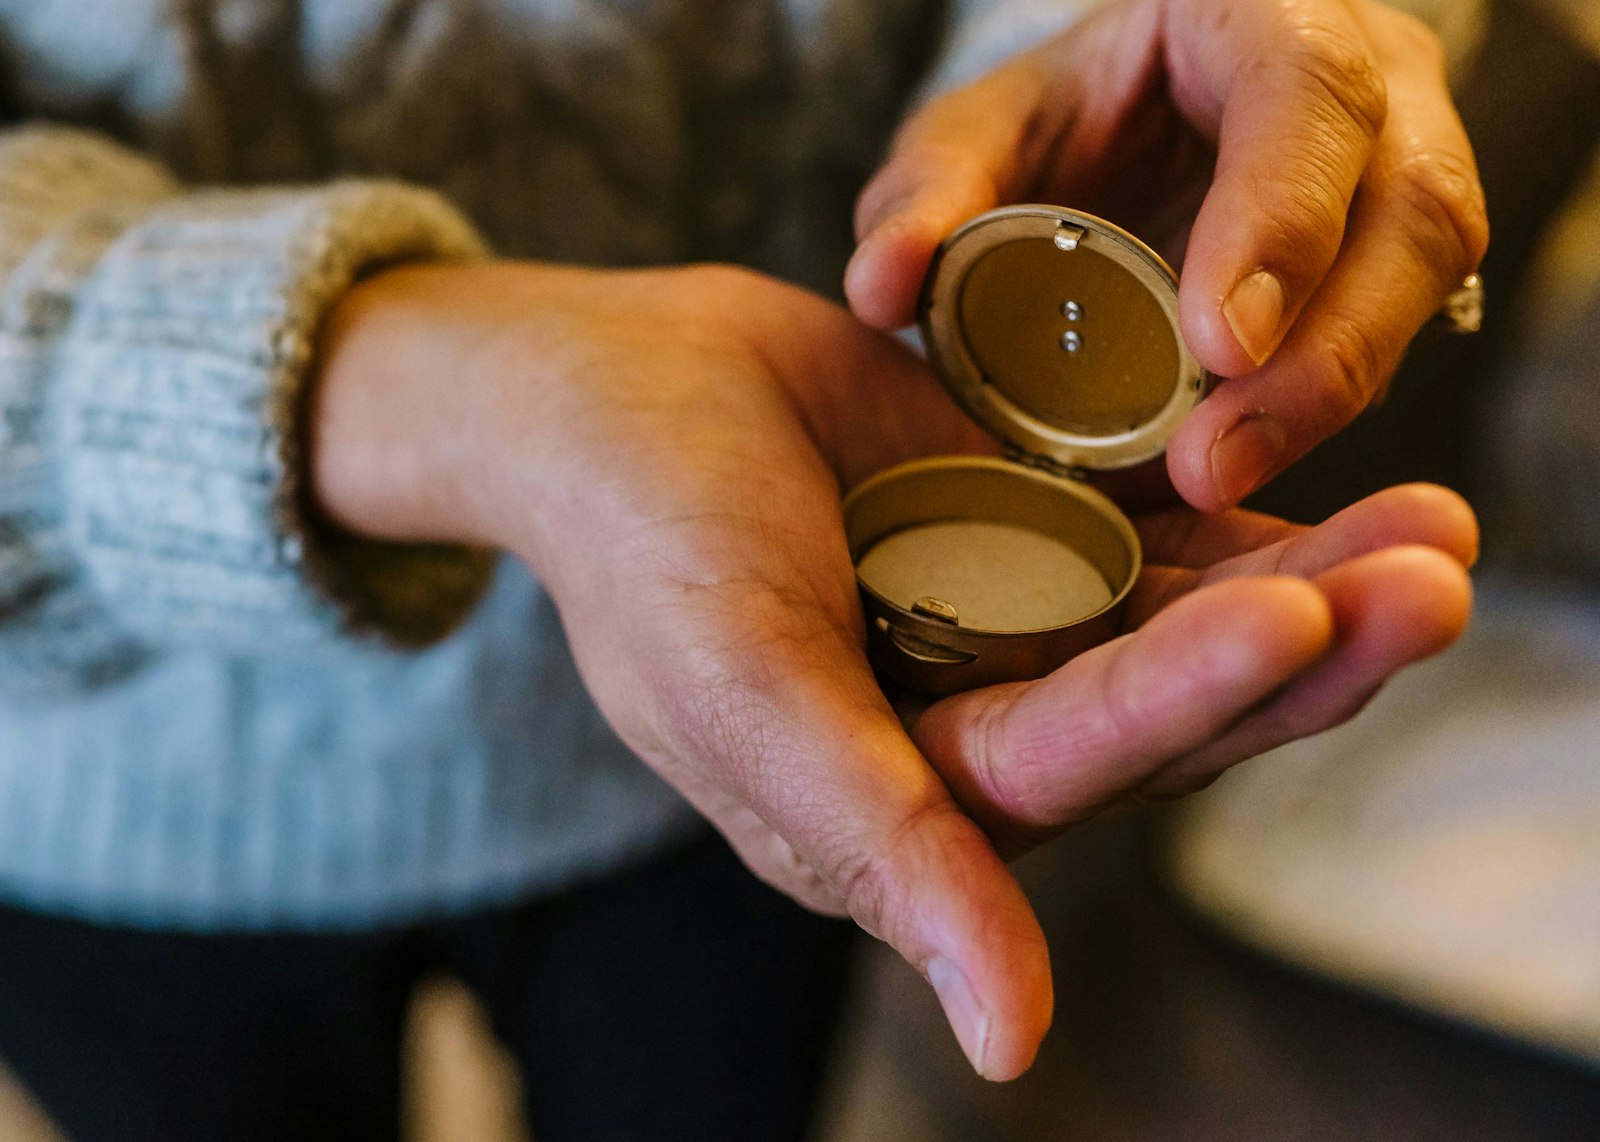 Ministers must keep the Eucharist in a special vessel, called a pyx, and go directly to the person who will receive it after leaving the parish with the host. Volunteers lead a brief, special prayer service with those who will receive.